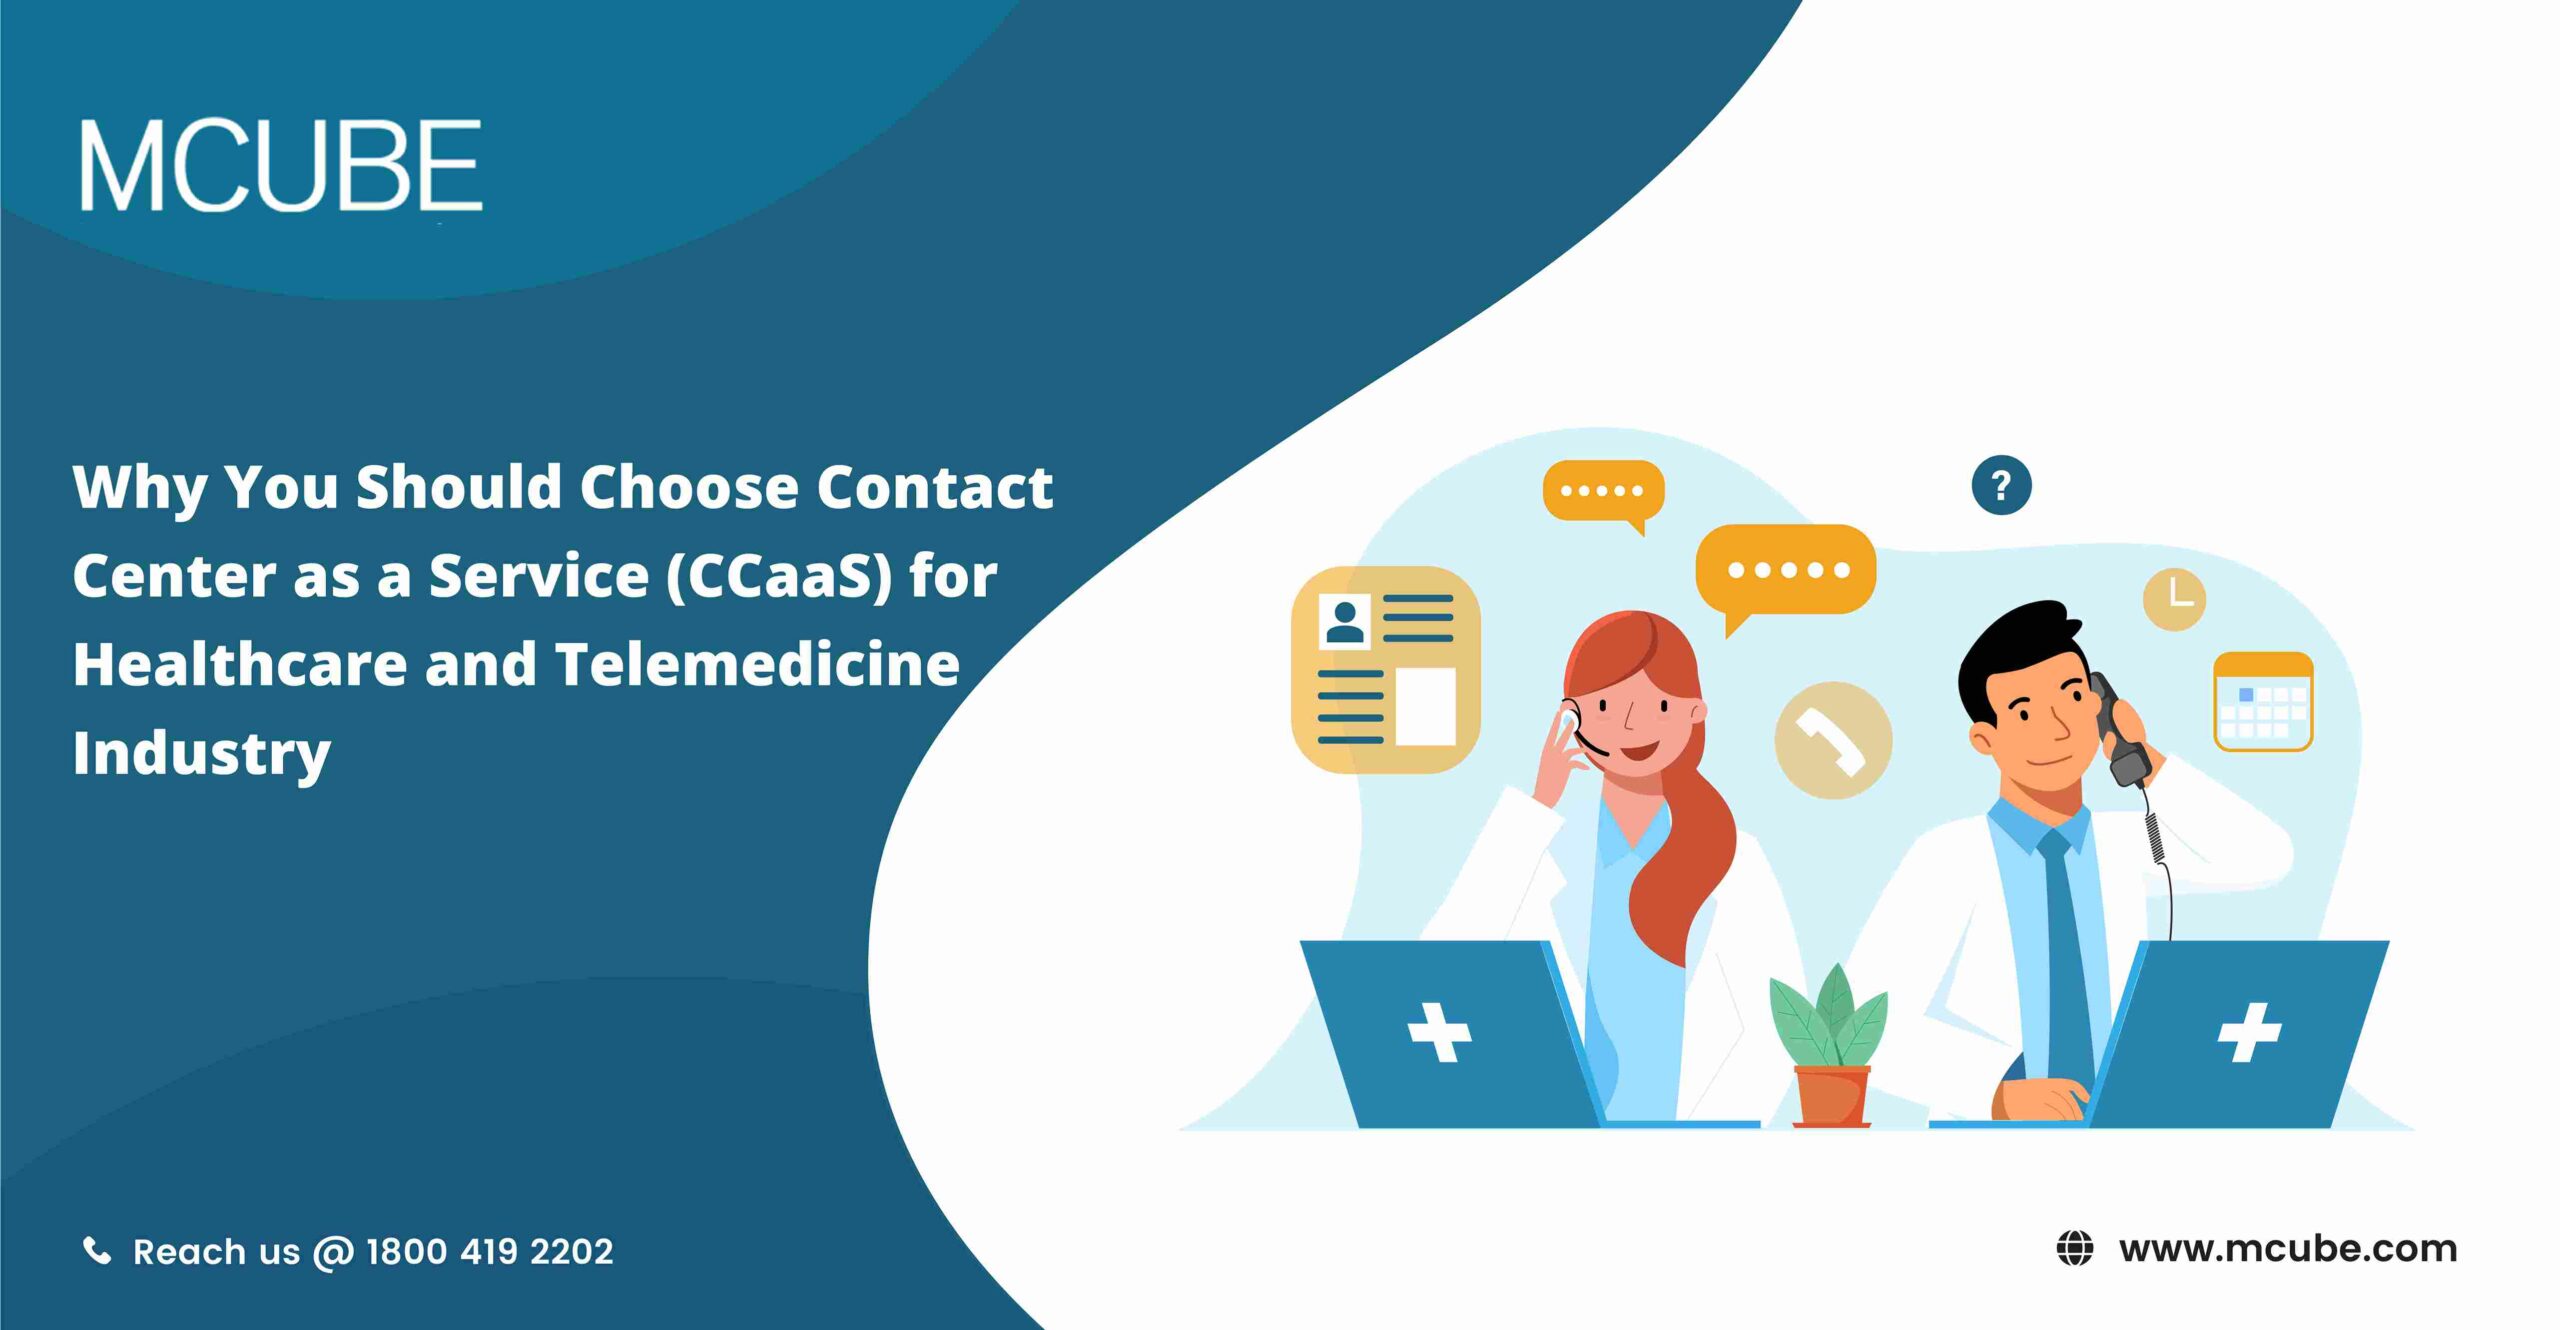 Why You Should Choose Contact Center as a Service (CCaaS) for Healthcare and Telemedicine Industry